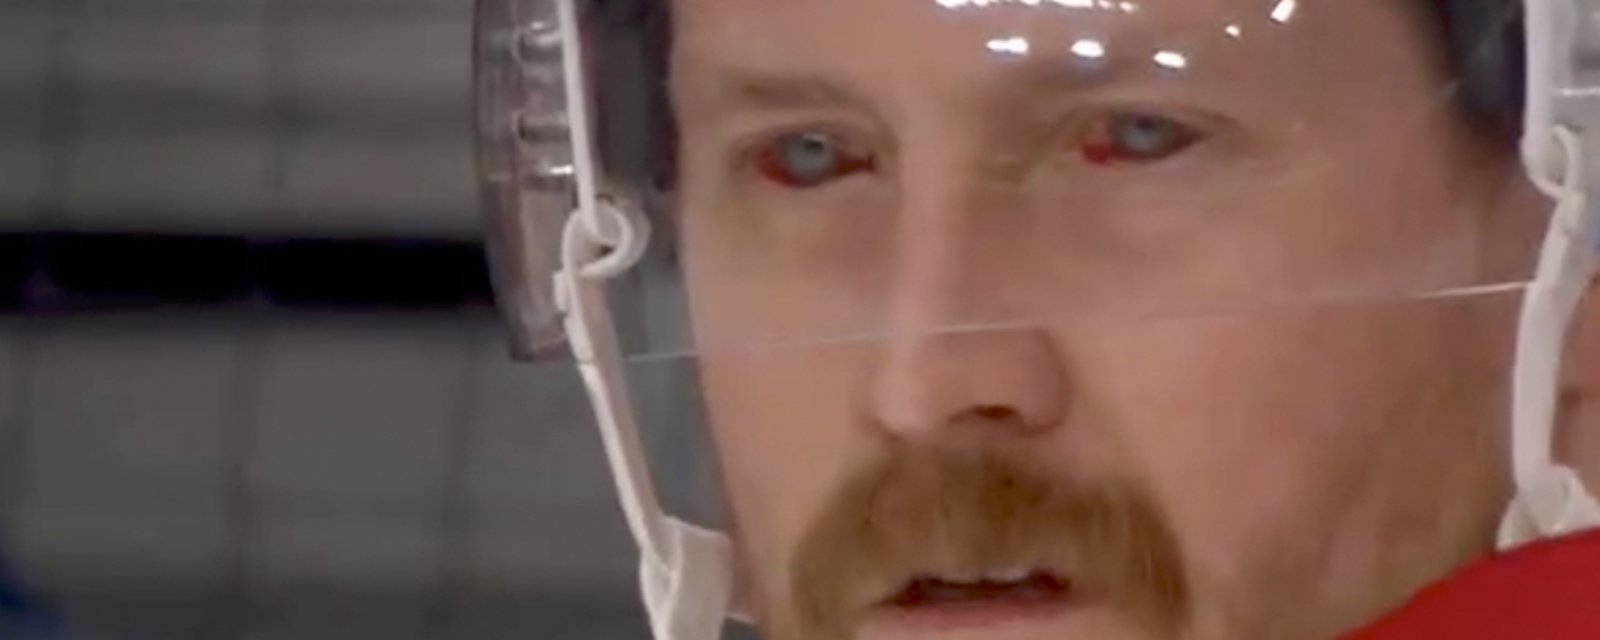 Fans can’t get over Jeff Petry’s bloodshot eyes